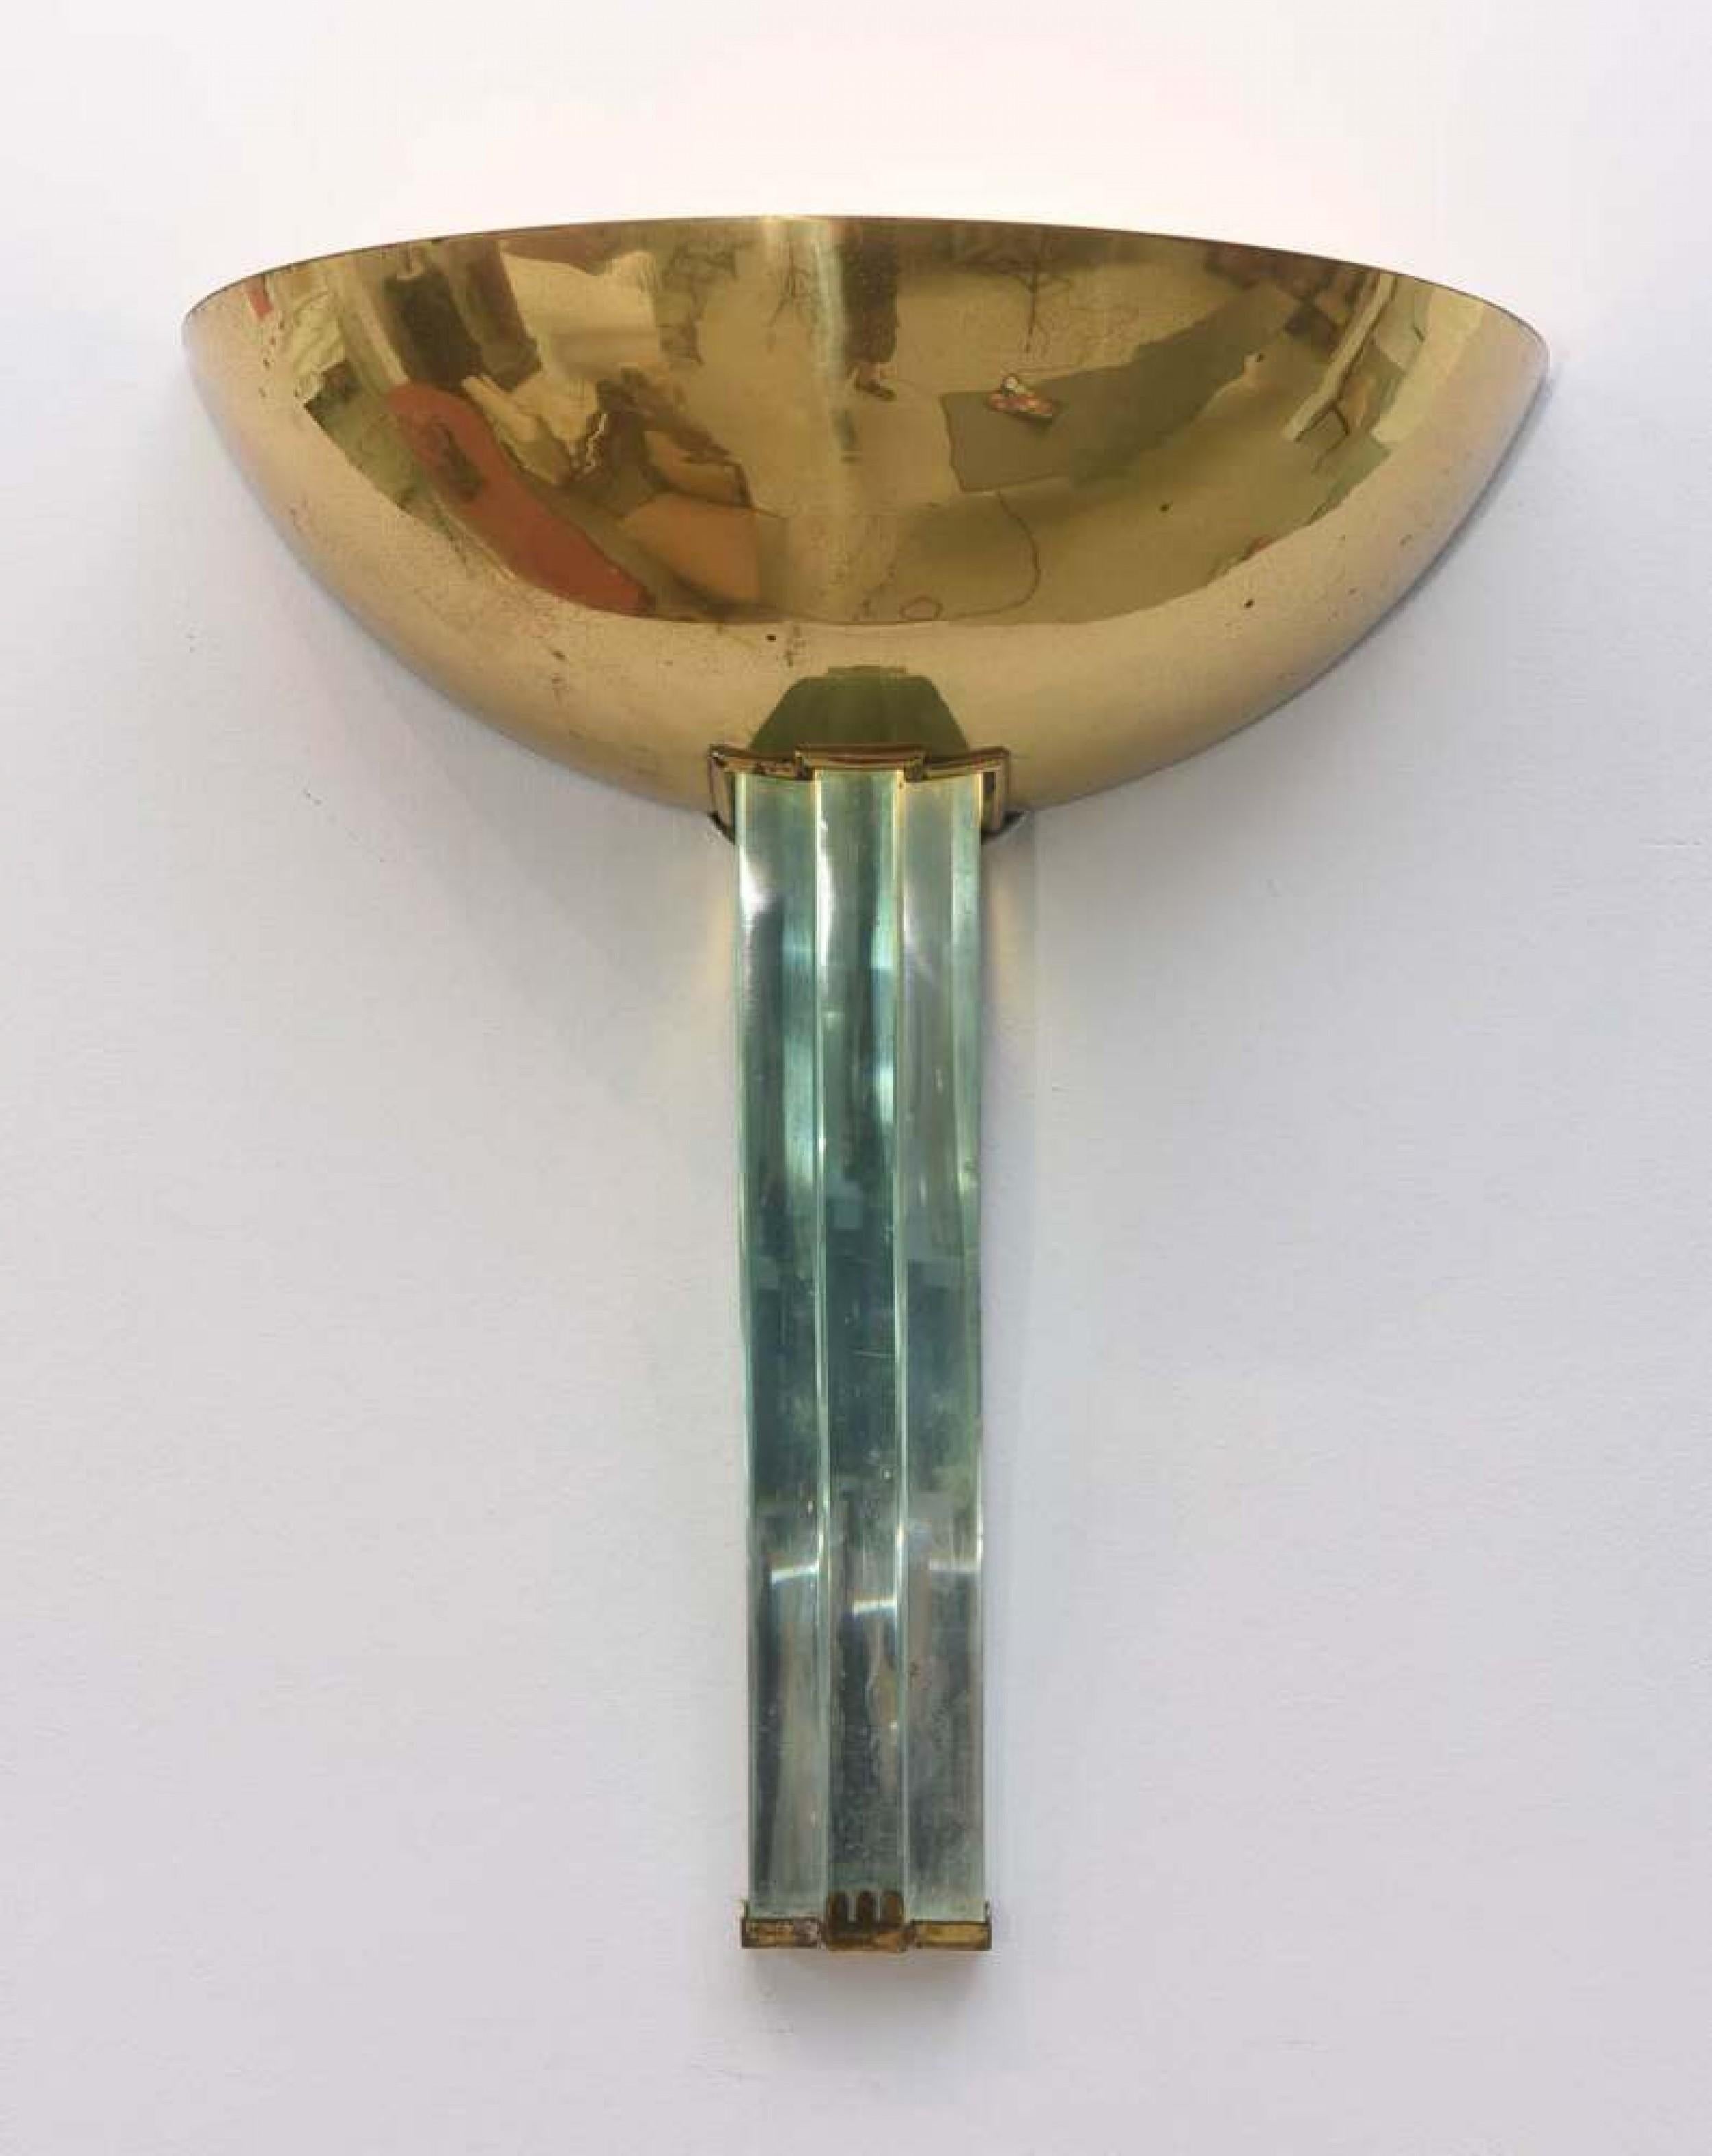 PAIR of midcentury Italian Modern brass and glass wall lights / sconces (Pietro Chiesa for Fontana Arte) (PRICED AS PAIR).